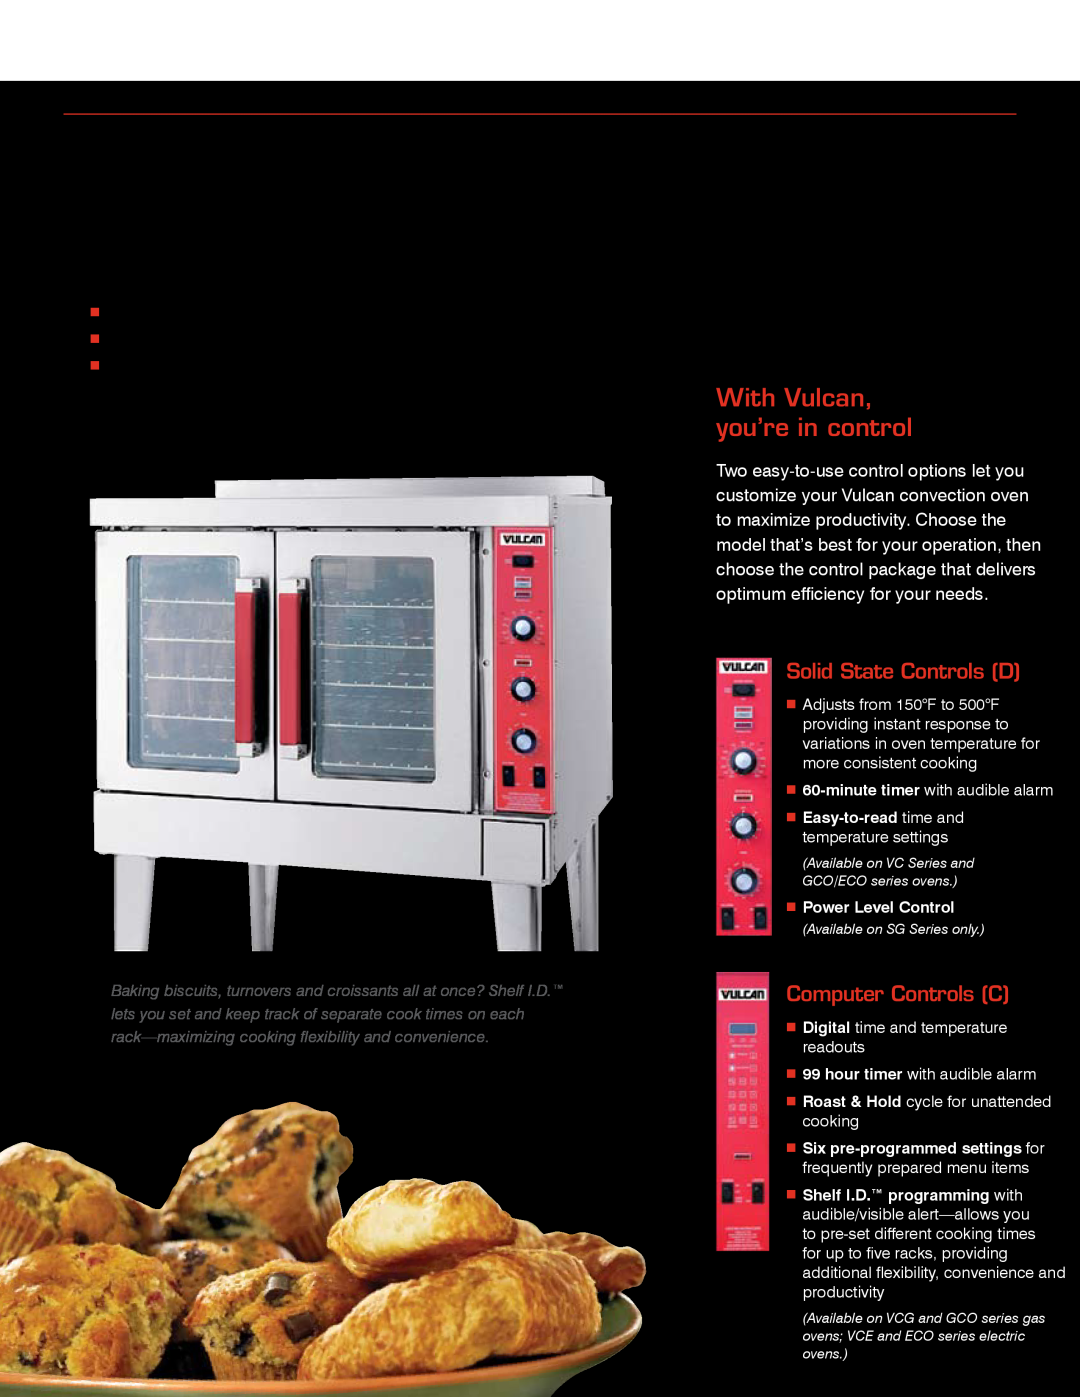 Vulcan-Hart VC6G manual Convection Cooking at it’s Best, With Vulcan, you’re in control, Solid State Controls D 